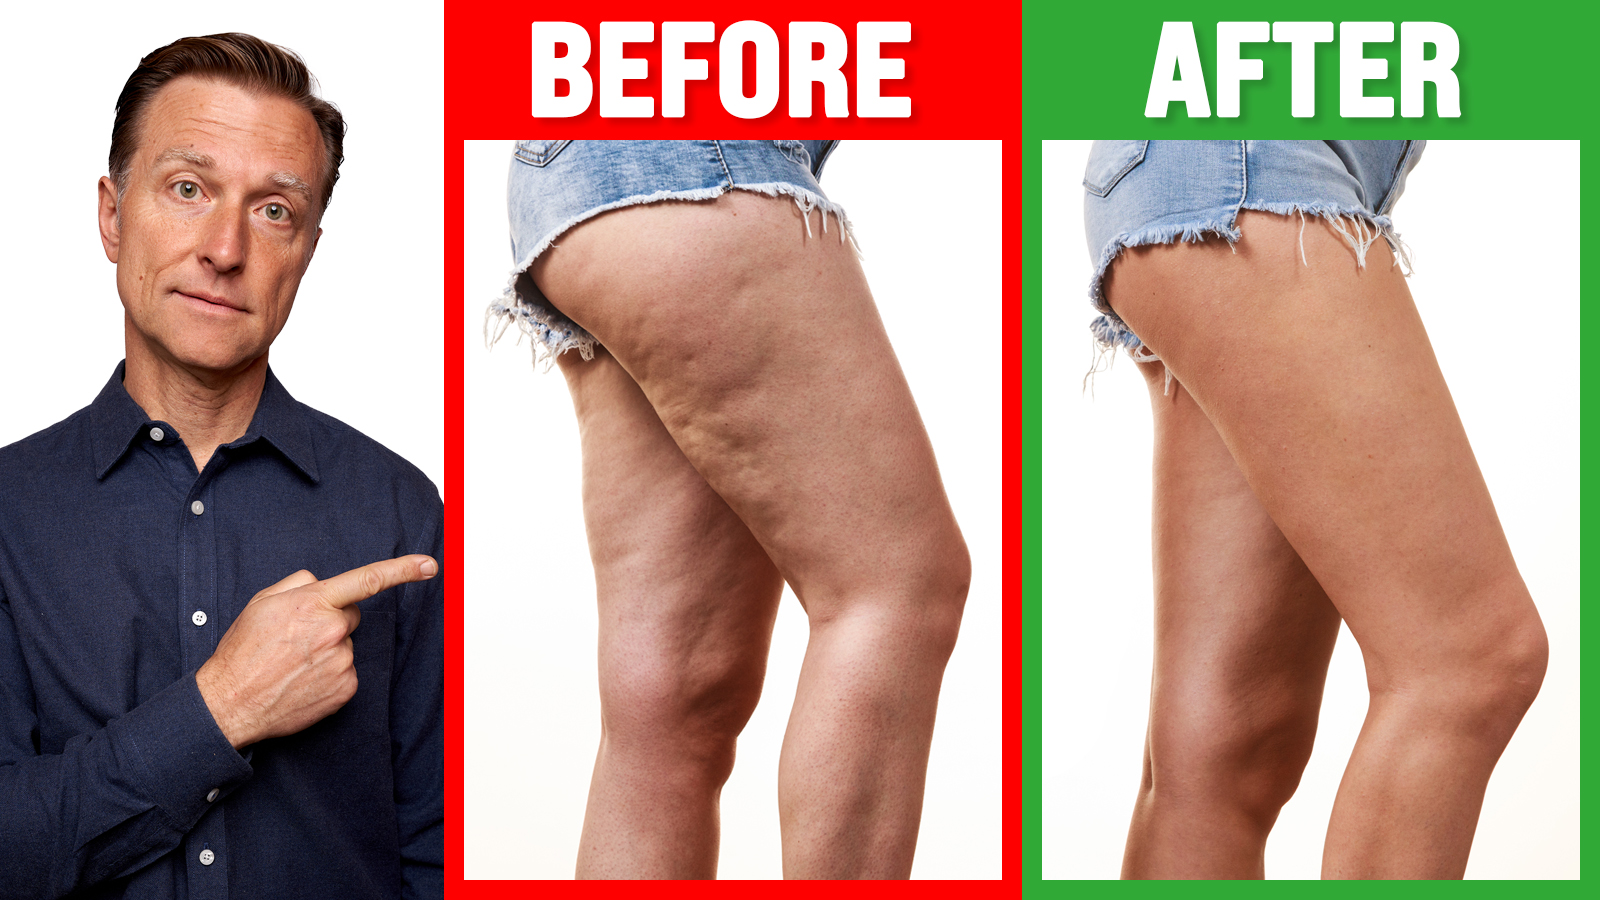 Why Does My Cellulite Hurt and How to Get Rid of It, by NutritionNerd